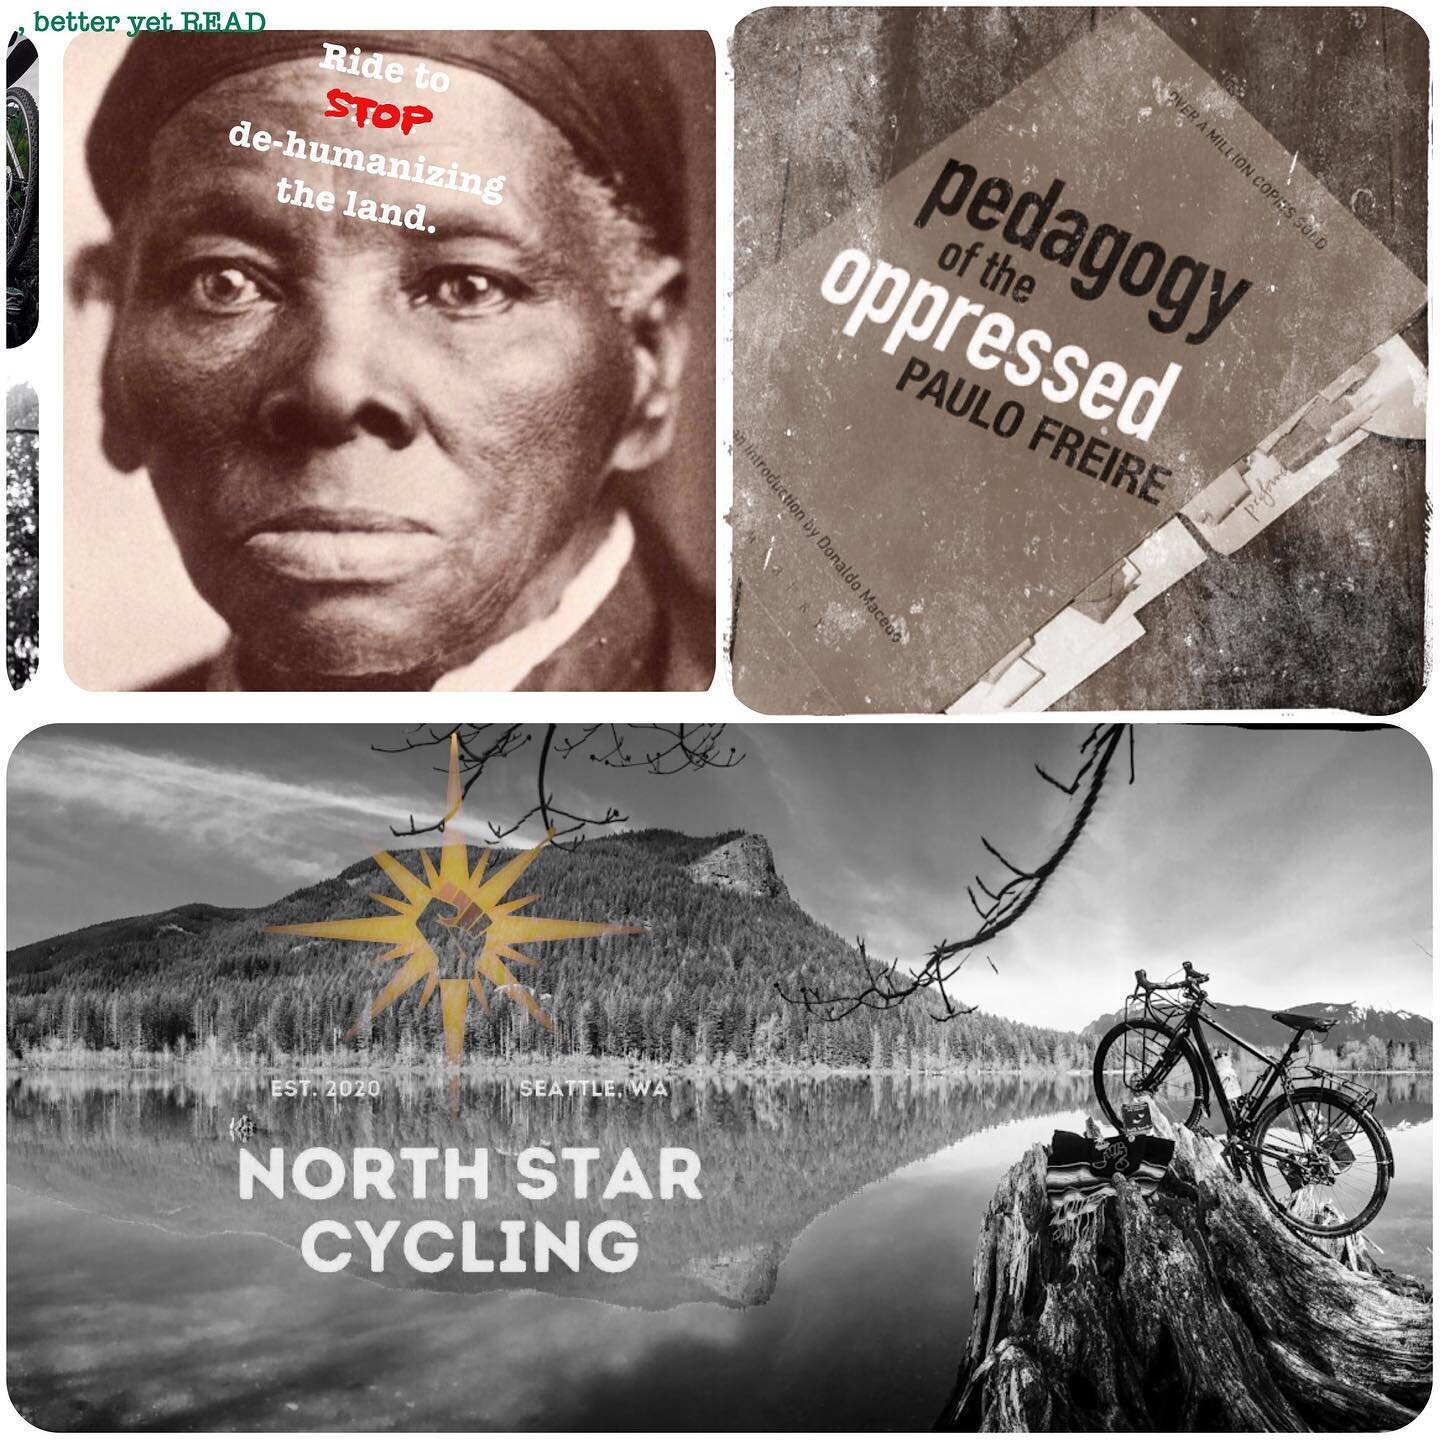 Let&rsquo;s ride...

Snoqualmie Valley Trail&nbsp; and the Iron Horse Trail are on occupied sdukʷalbixʷ (Snoqualmie) land, specifically the homelands of the Snoqualmie people. To understand the legacy of settler colonialism is to also understand the 